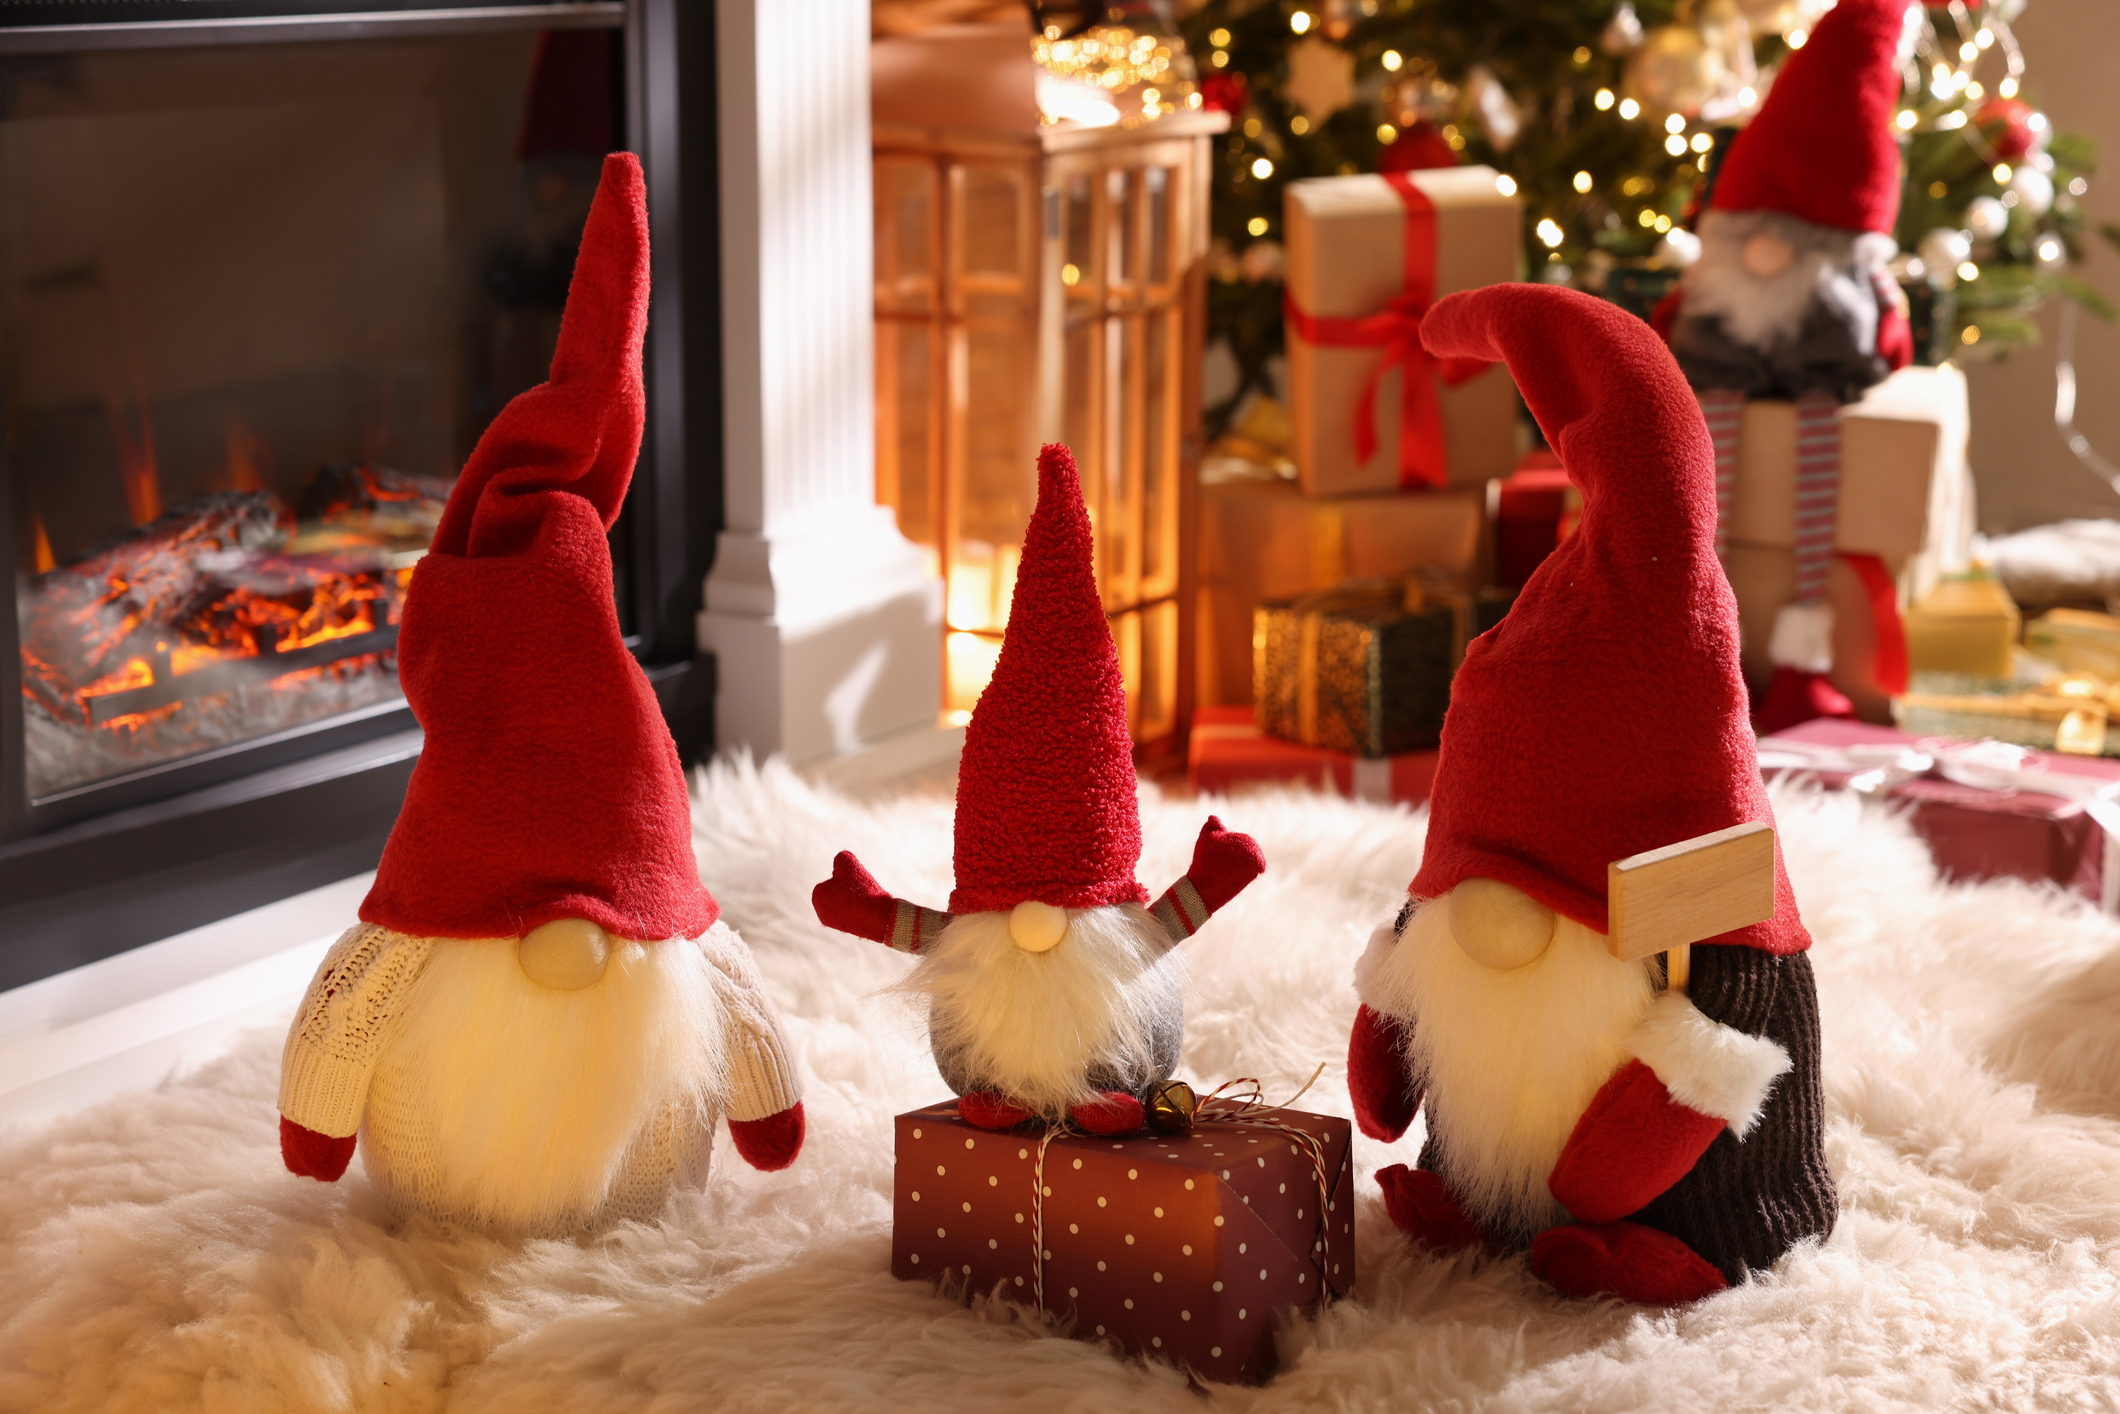 Pointy Hats and Wooden Crates: The Year-Round Resurgence of Gnome Mania